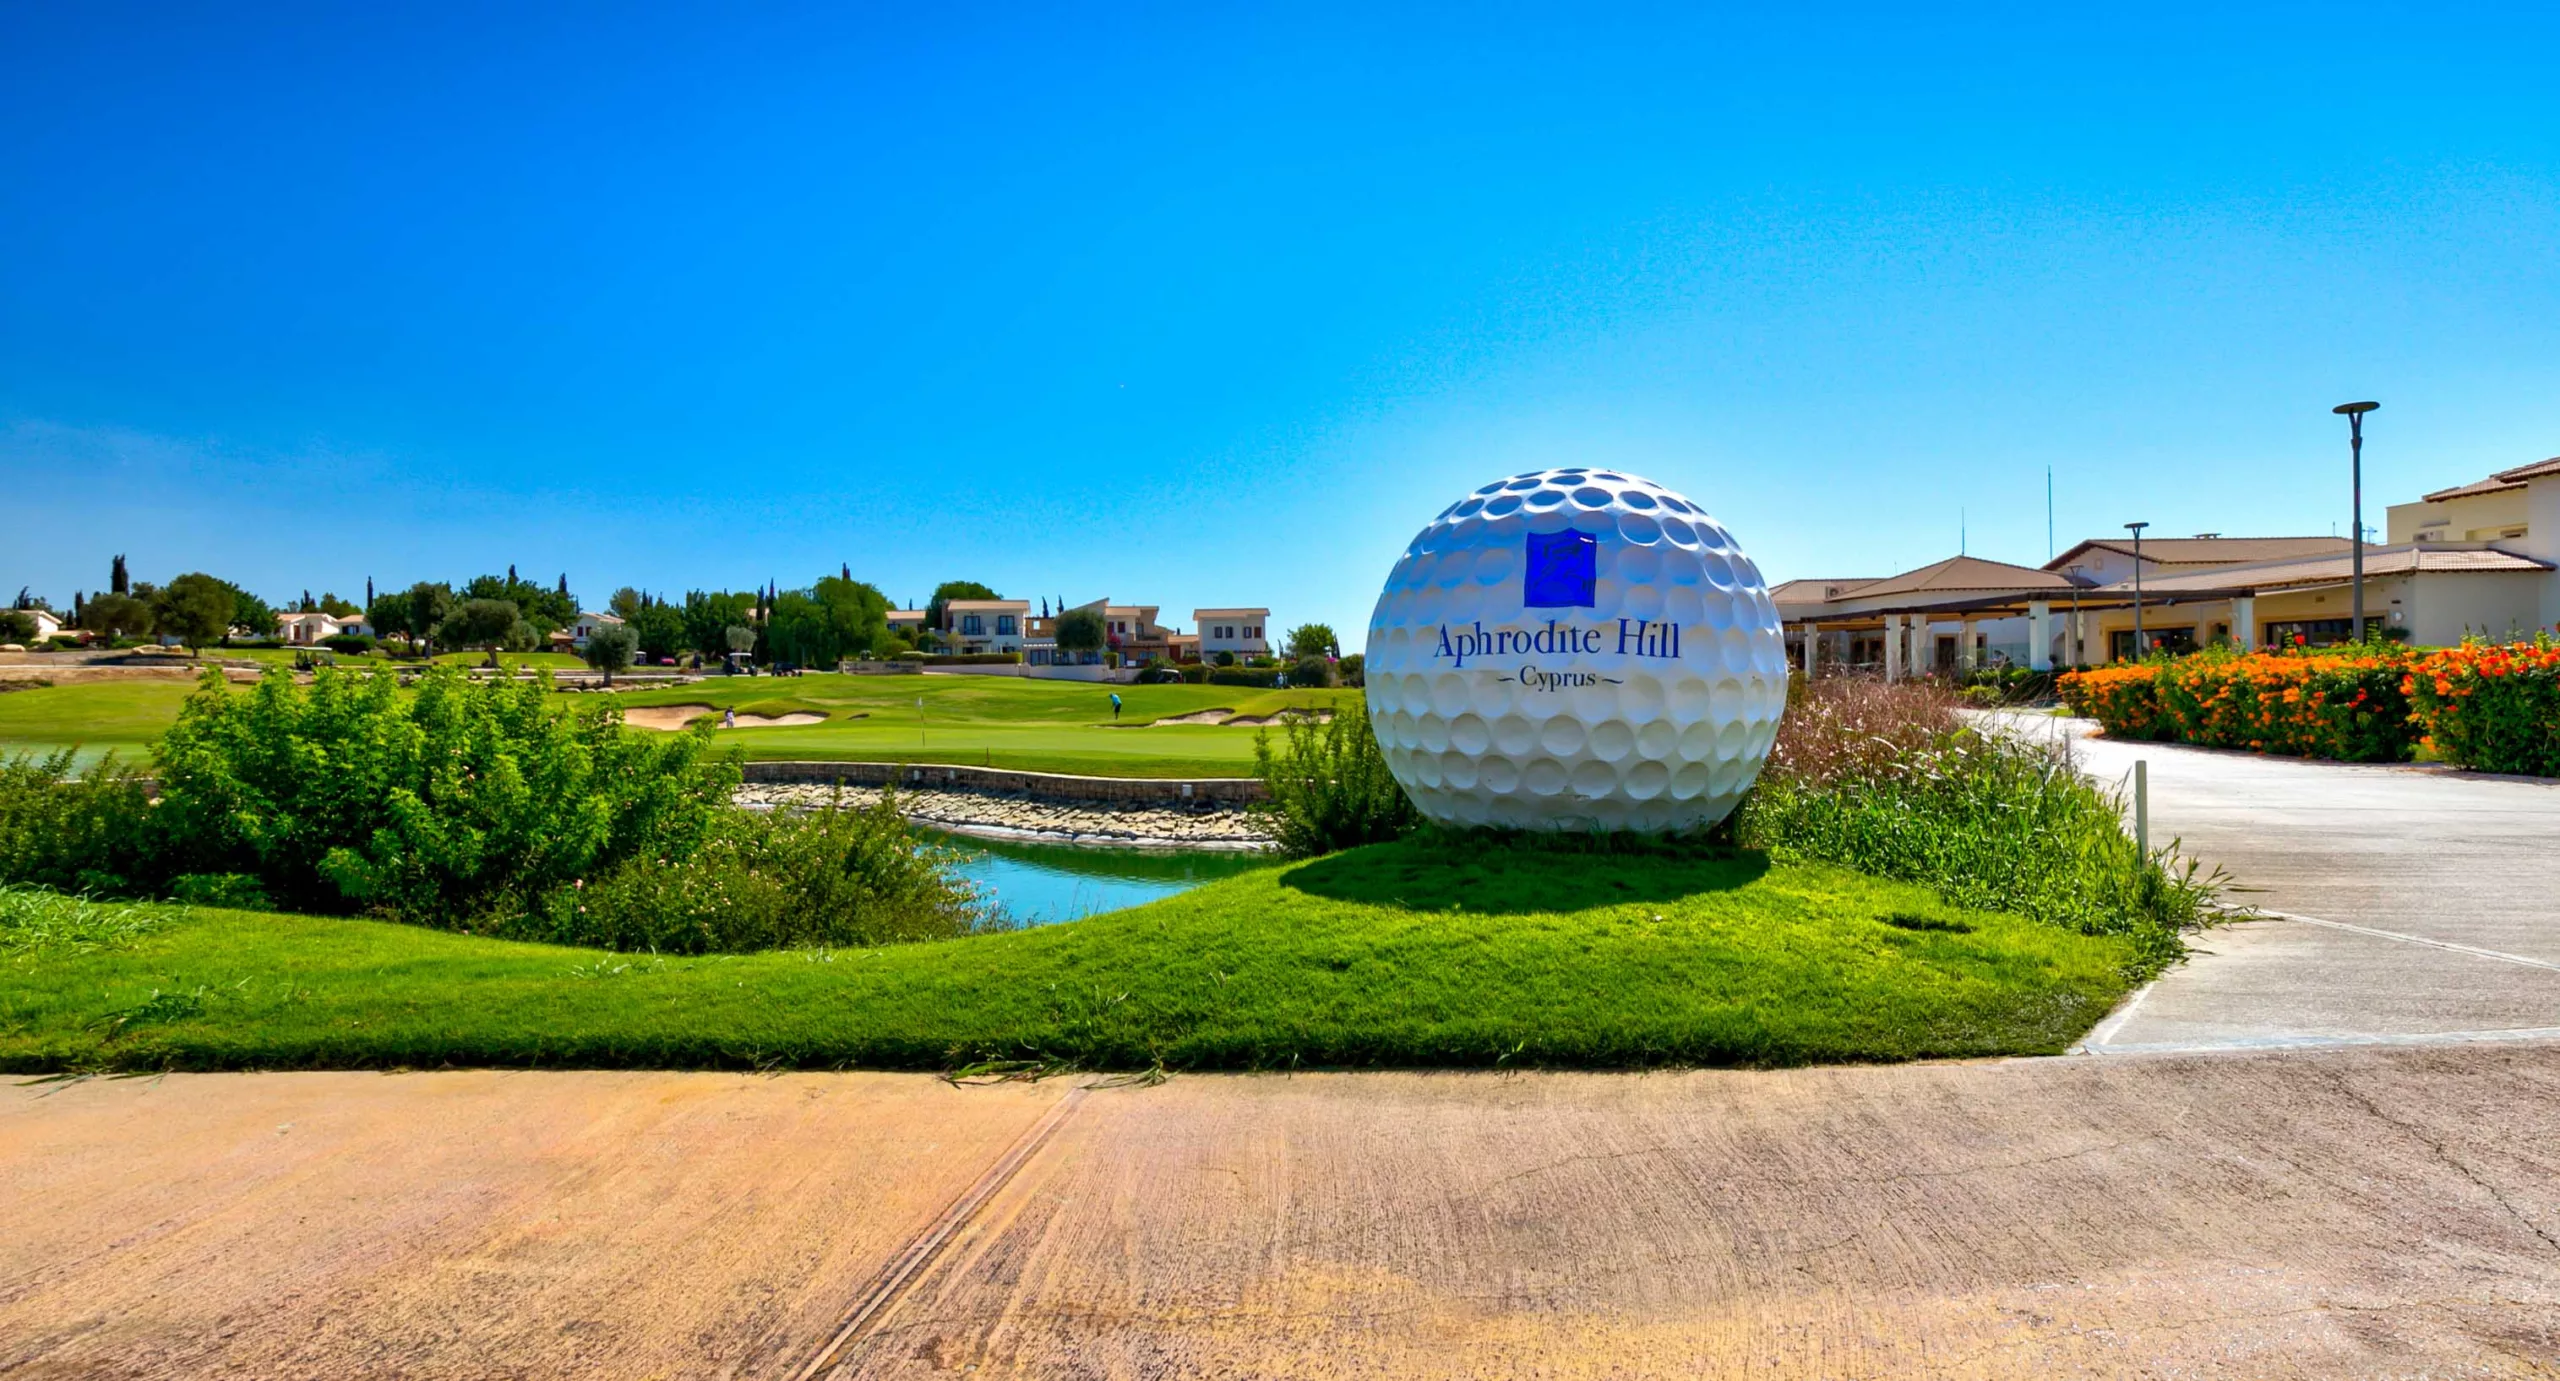 View of Aphrodite Hills Golf Clubhouse and 18th green from the chipping area, with an oversized golf ball in the foreground.